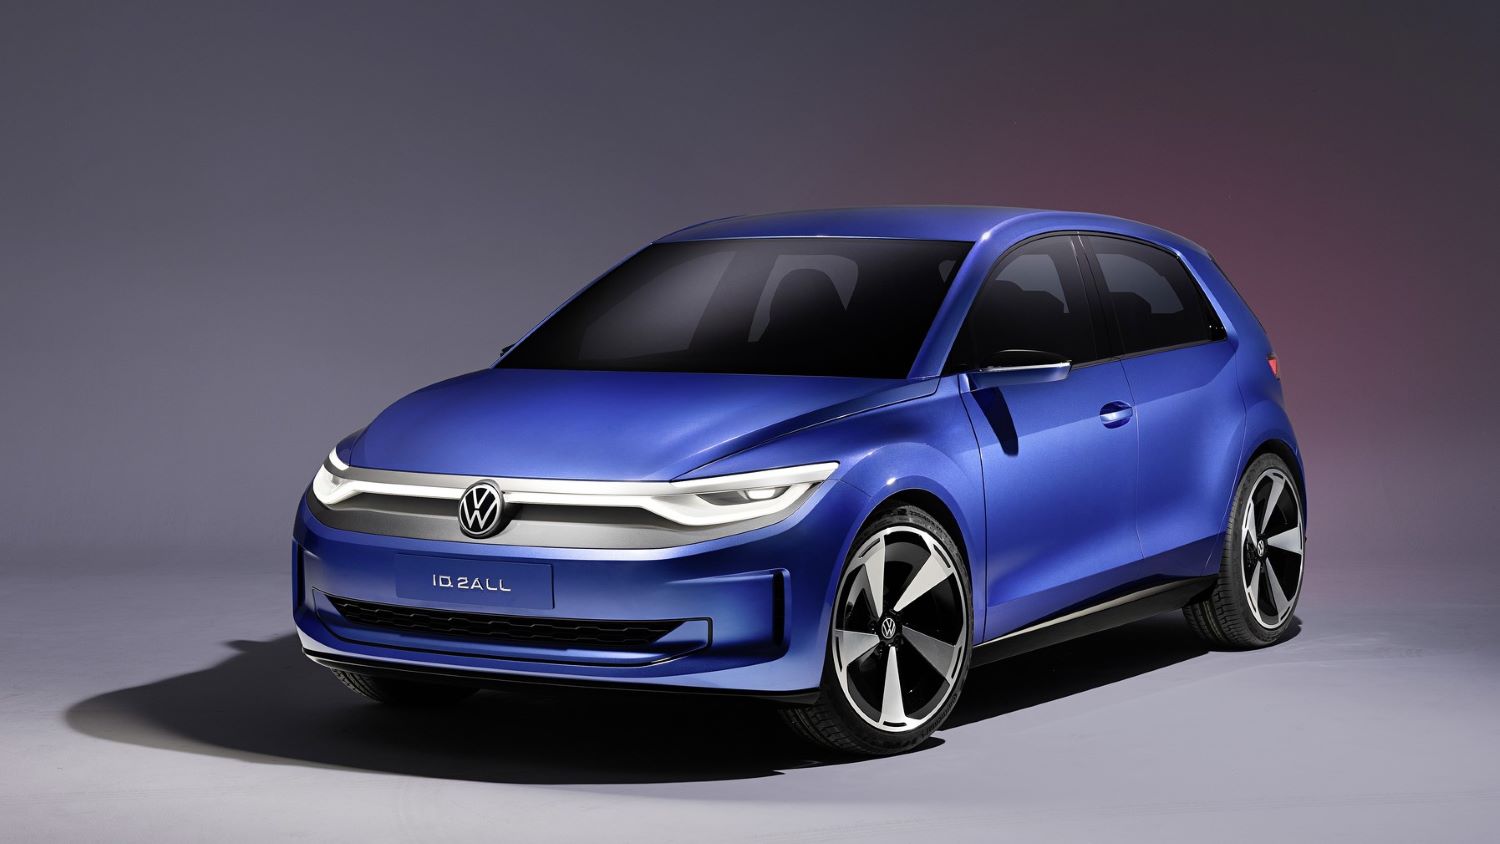 Front profile of the Volkswagen ID.2 concept.